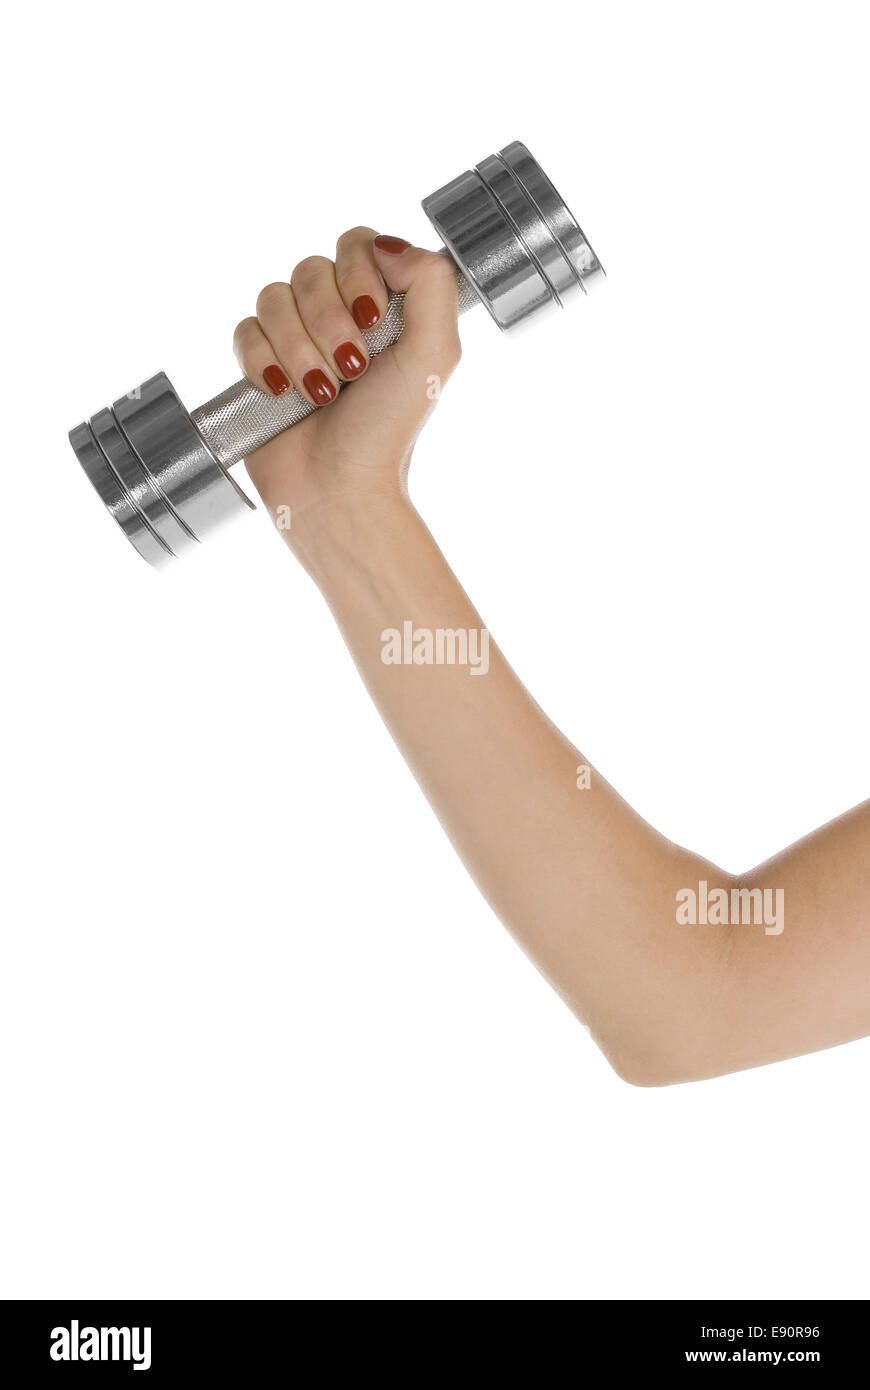 Barbell Stock Photo